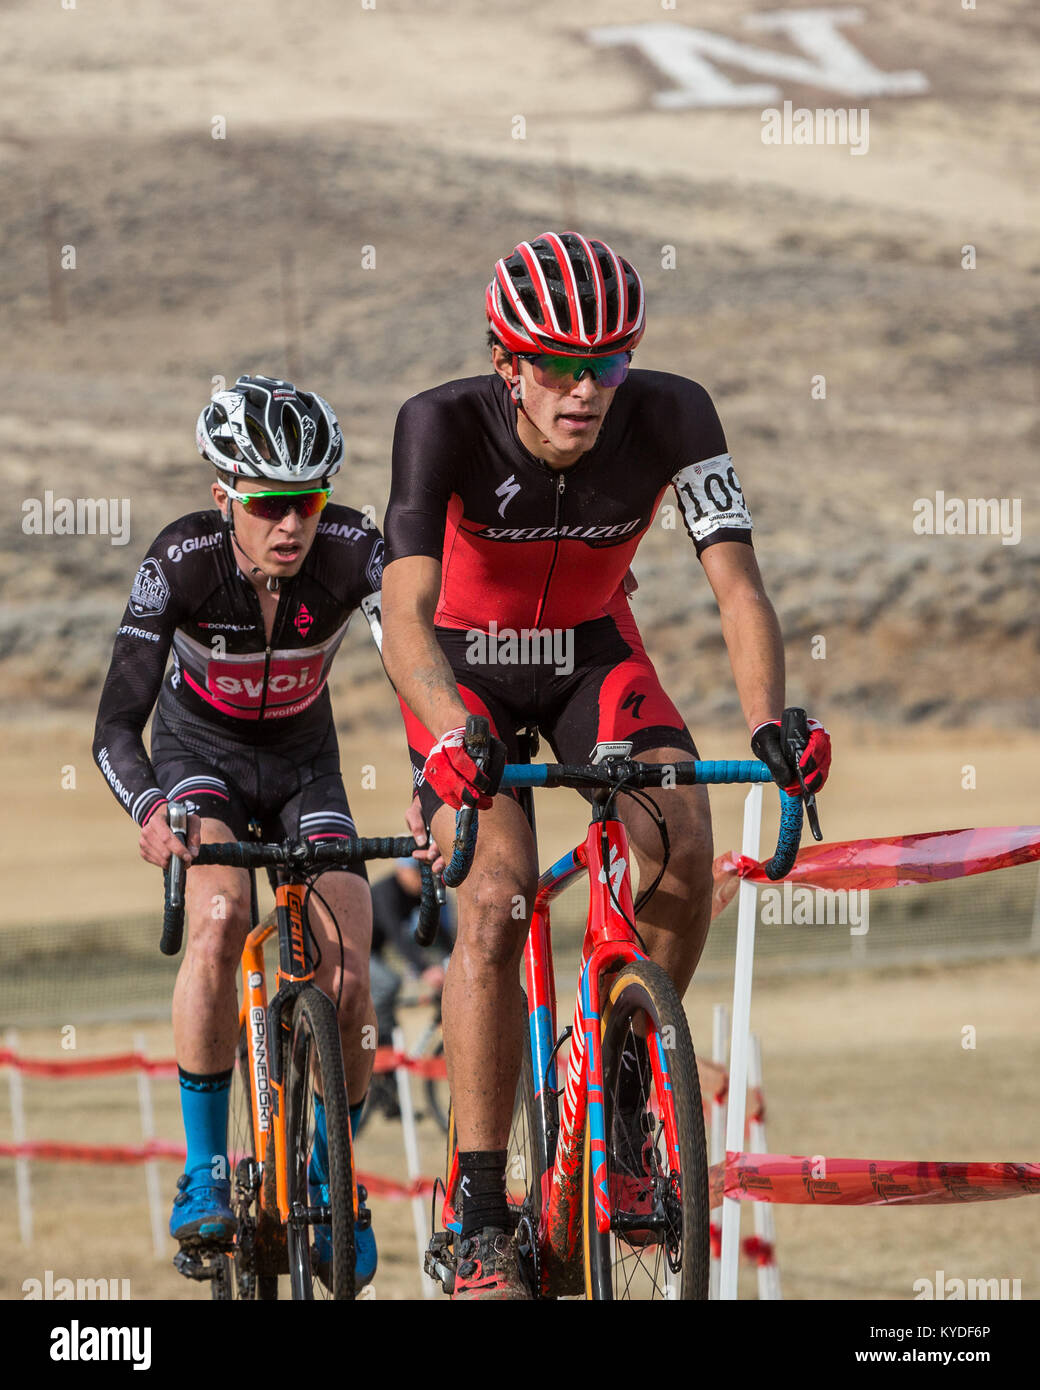 Reno, Nevada, USA. 14th Jan, 2018. CHRISTOPHER BLEVINS holds a tight lead over ERIC BRUNNER during the Men's U23 USA Cycling Cyclocross National Championships at Rancho San Rafael Park in Reno, Nevada, on Sunday, January 14, 2018. Blevins and Brunner exchanged leads throughout the race, with Blevins taking victory in 52:38, six seconds in front of Brunner. Credit: Tracy Barbutes/ZUMA Wire/Alamy Live News Stock Photo